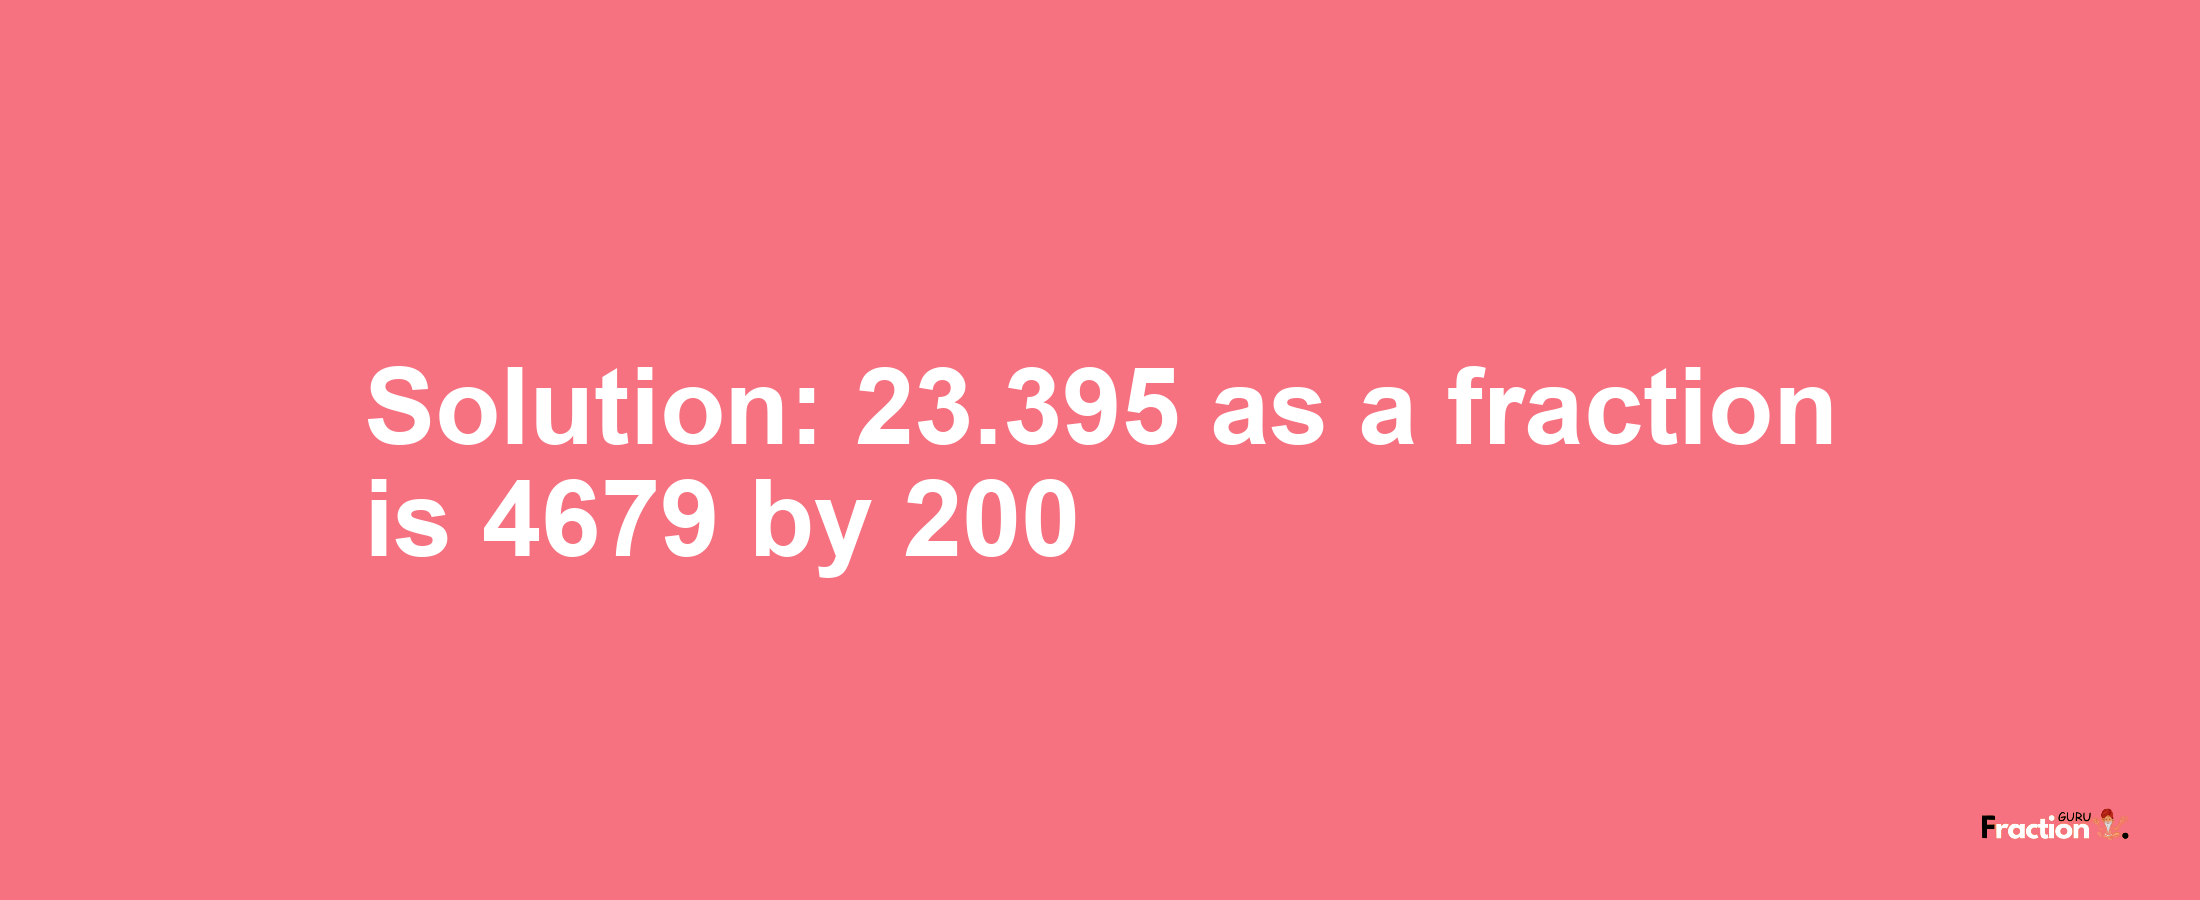 Solution:23.395 as a fraction is 4679/200